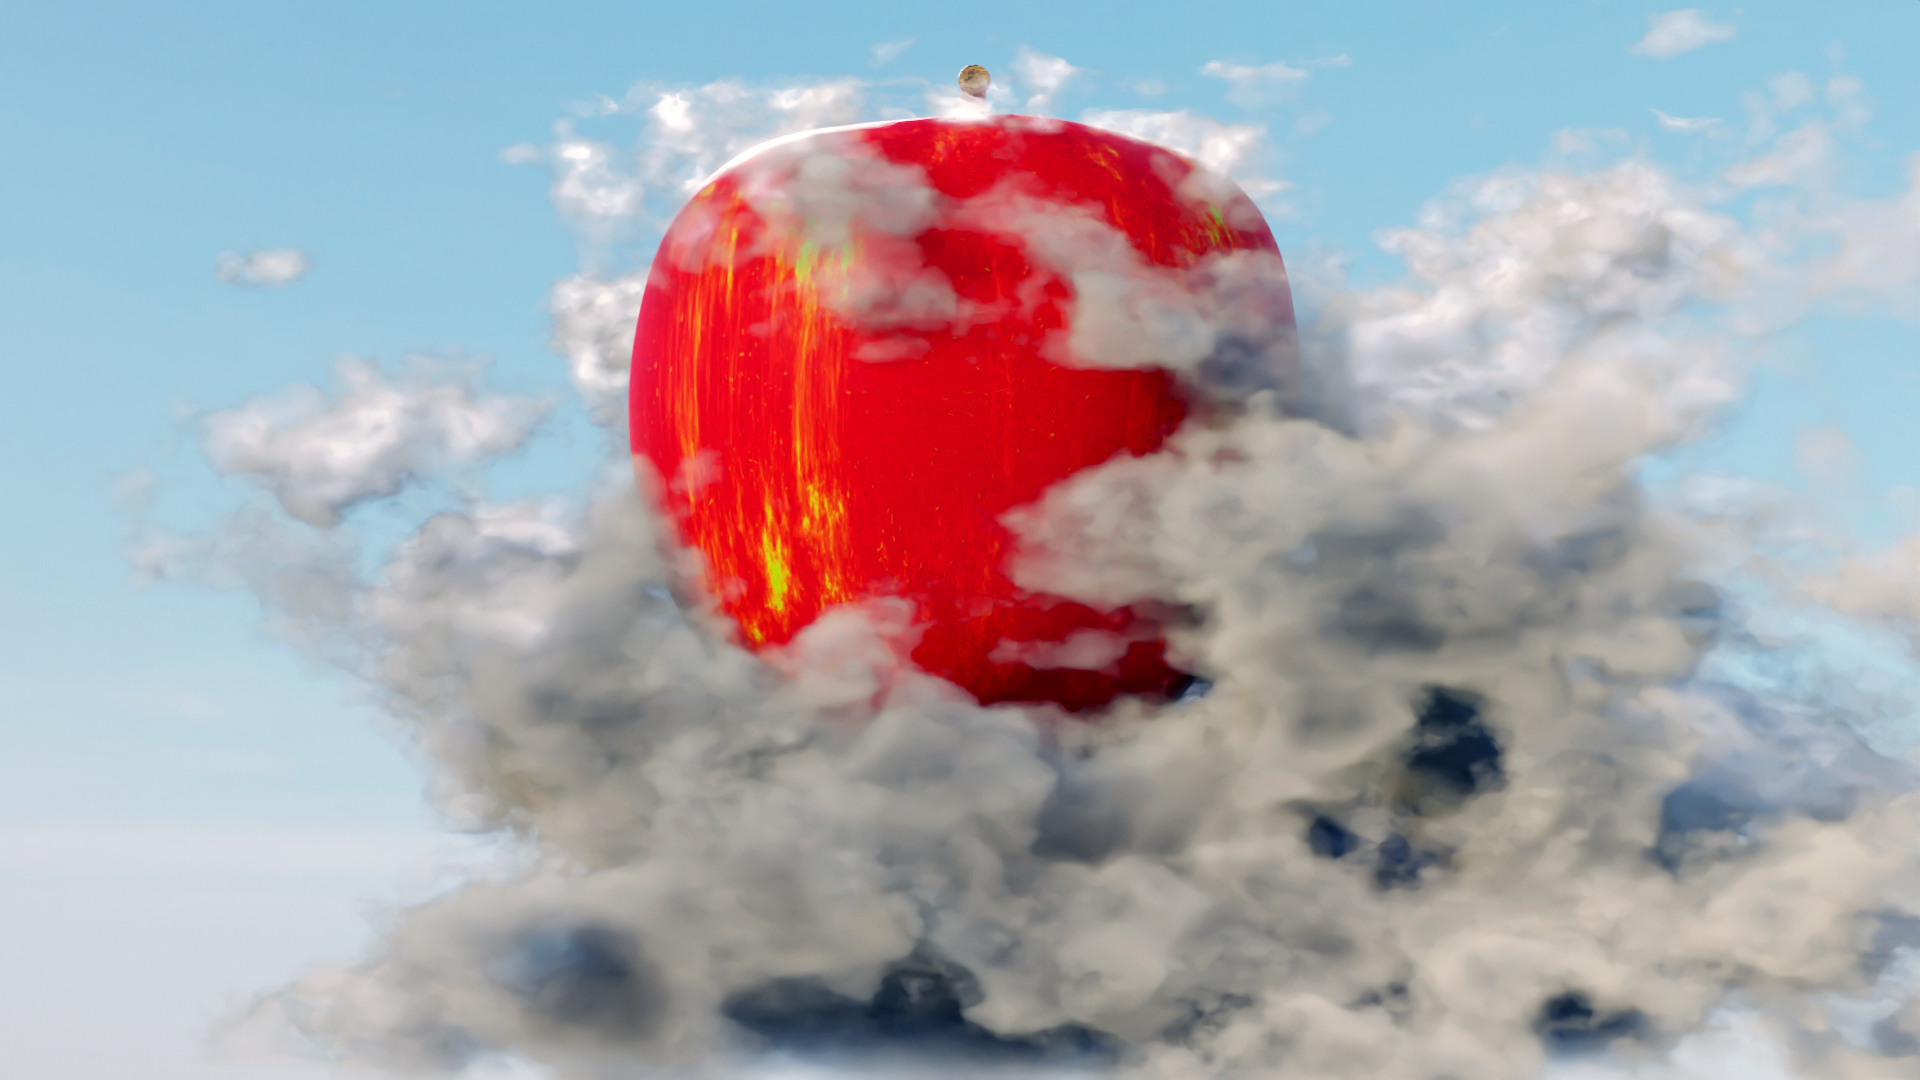 General 1920x1080 red apple clouds 3D Abstract abstract CGI Blender procedural generation